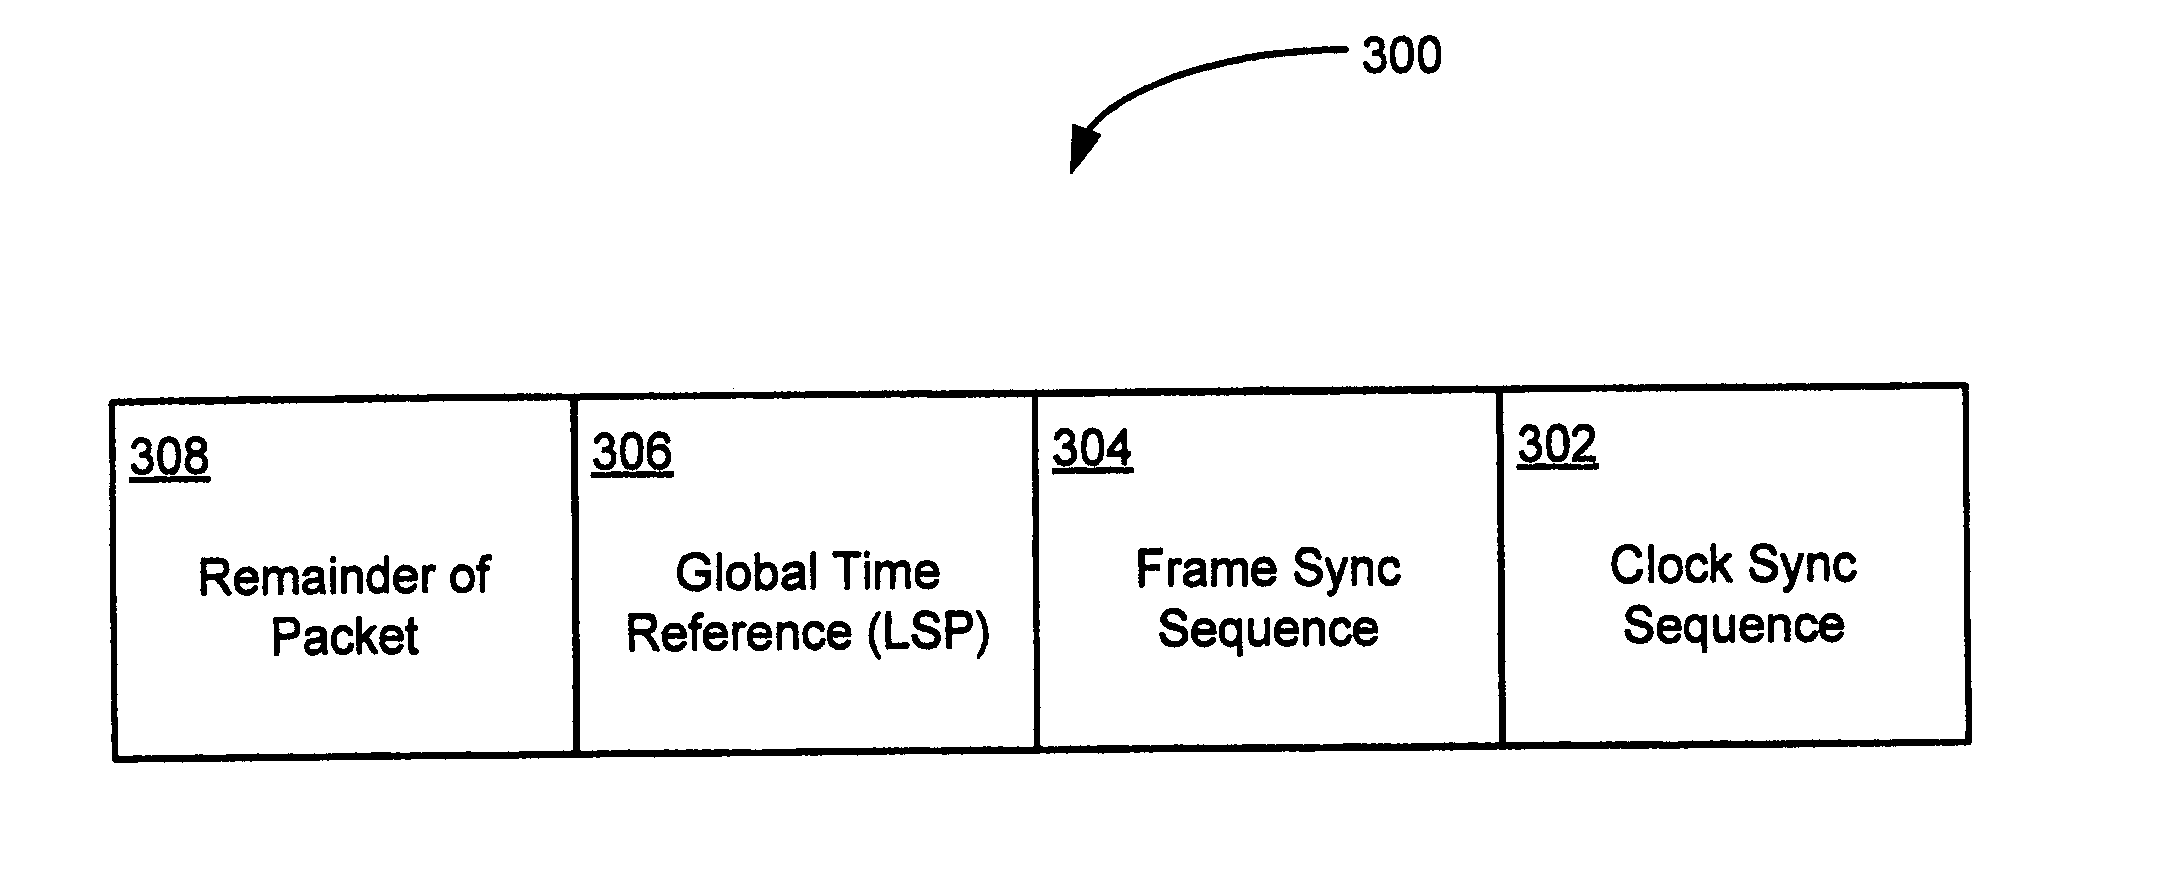 Maintaining a global time reference among a group of networked devices